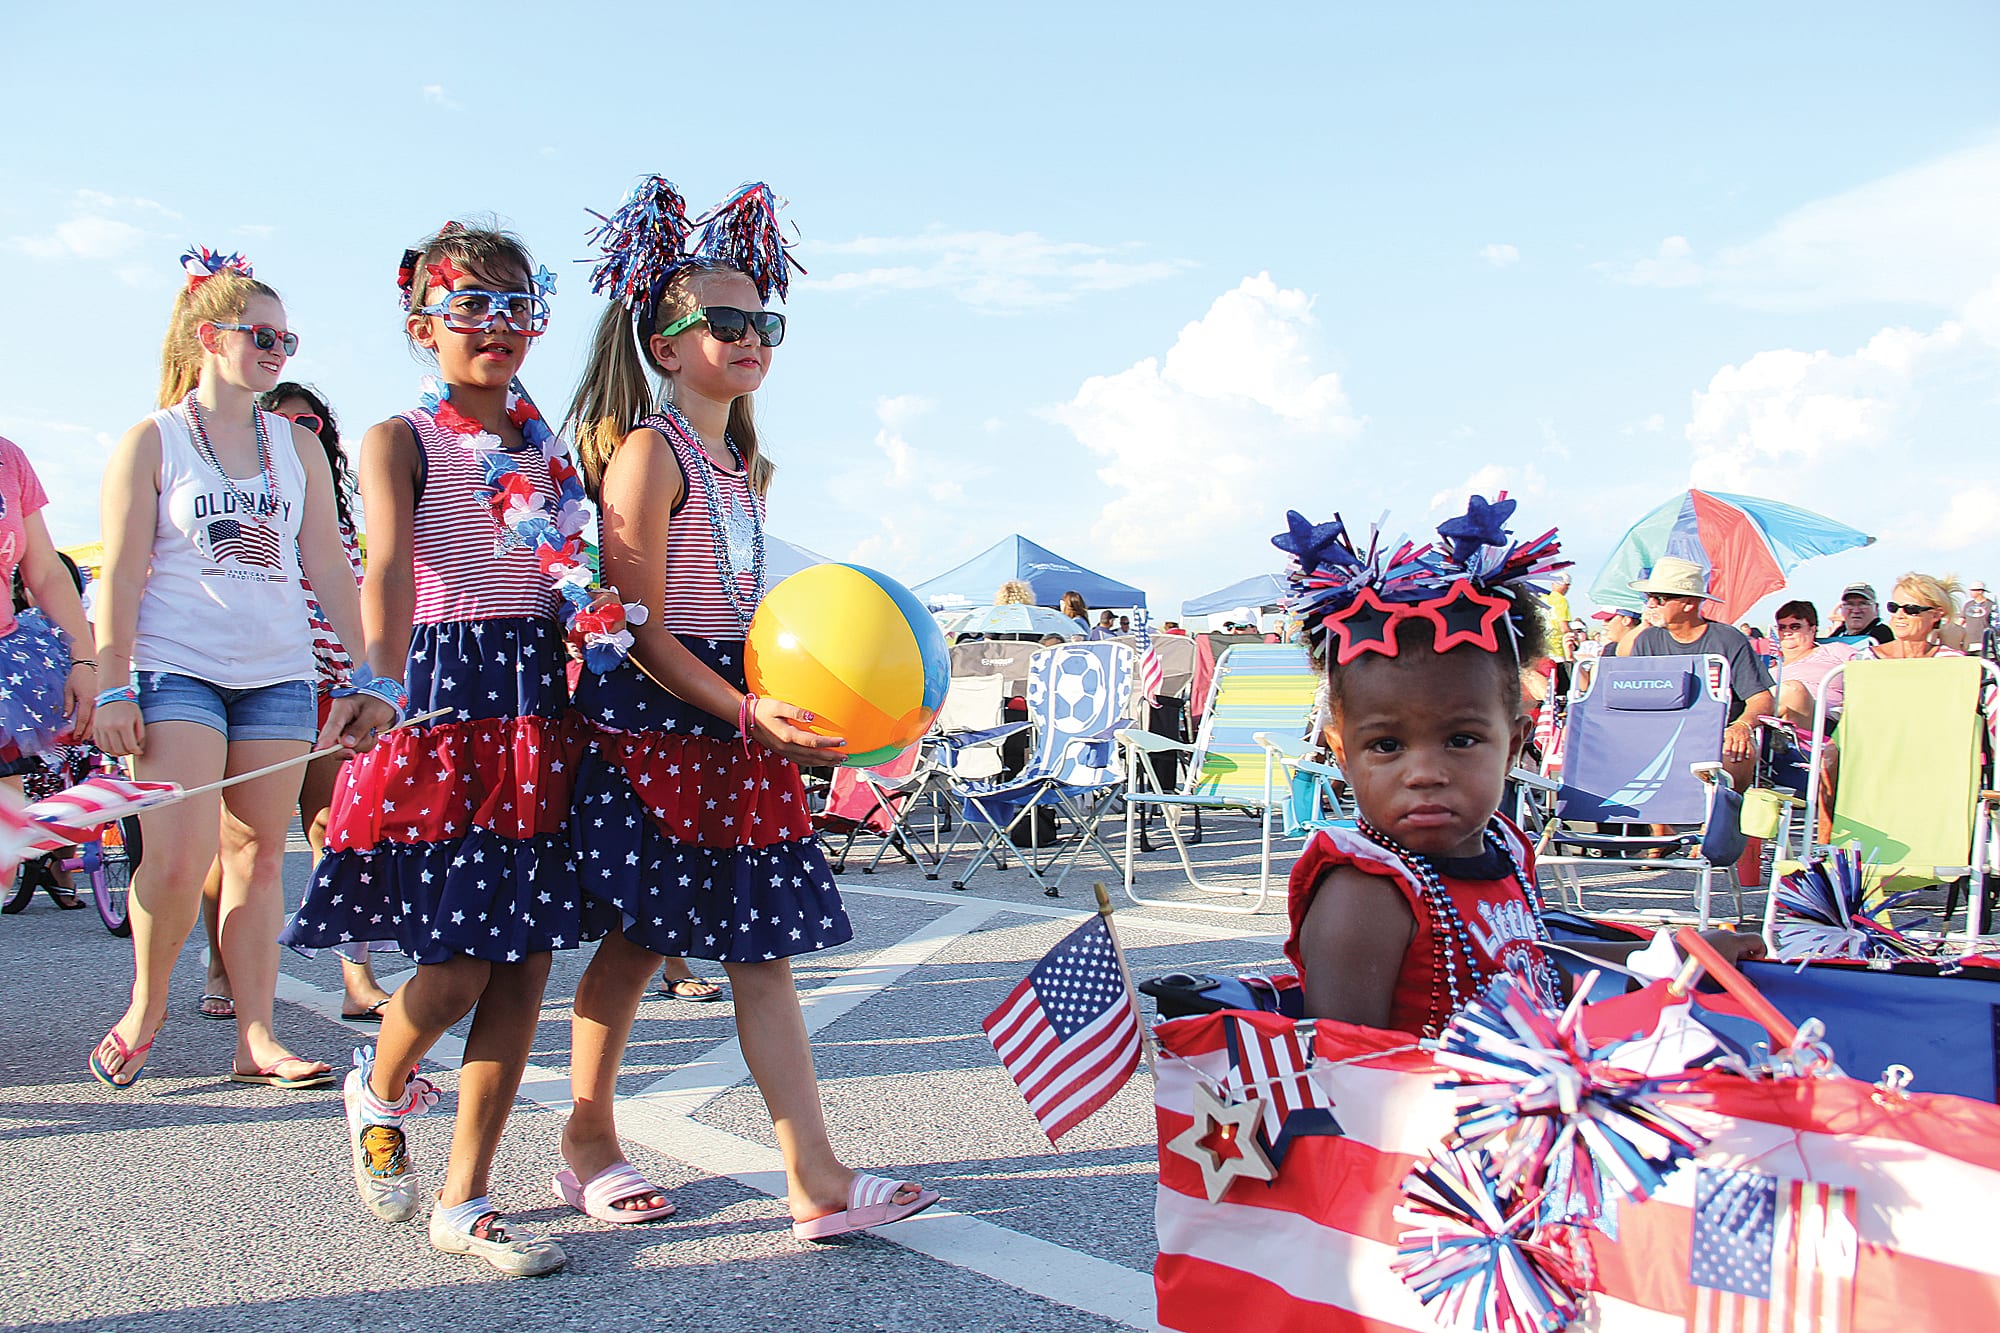 No children’s parade this year, Hometown Fourth of July event still a